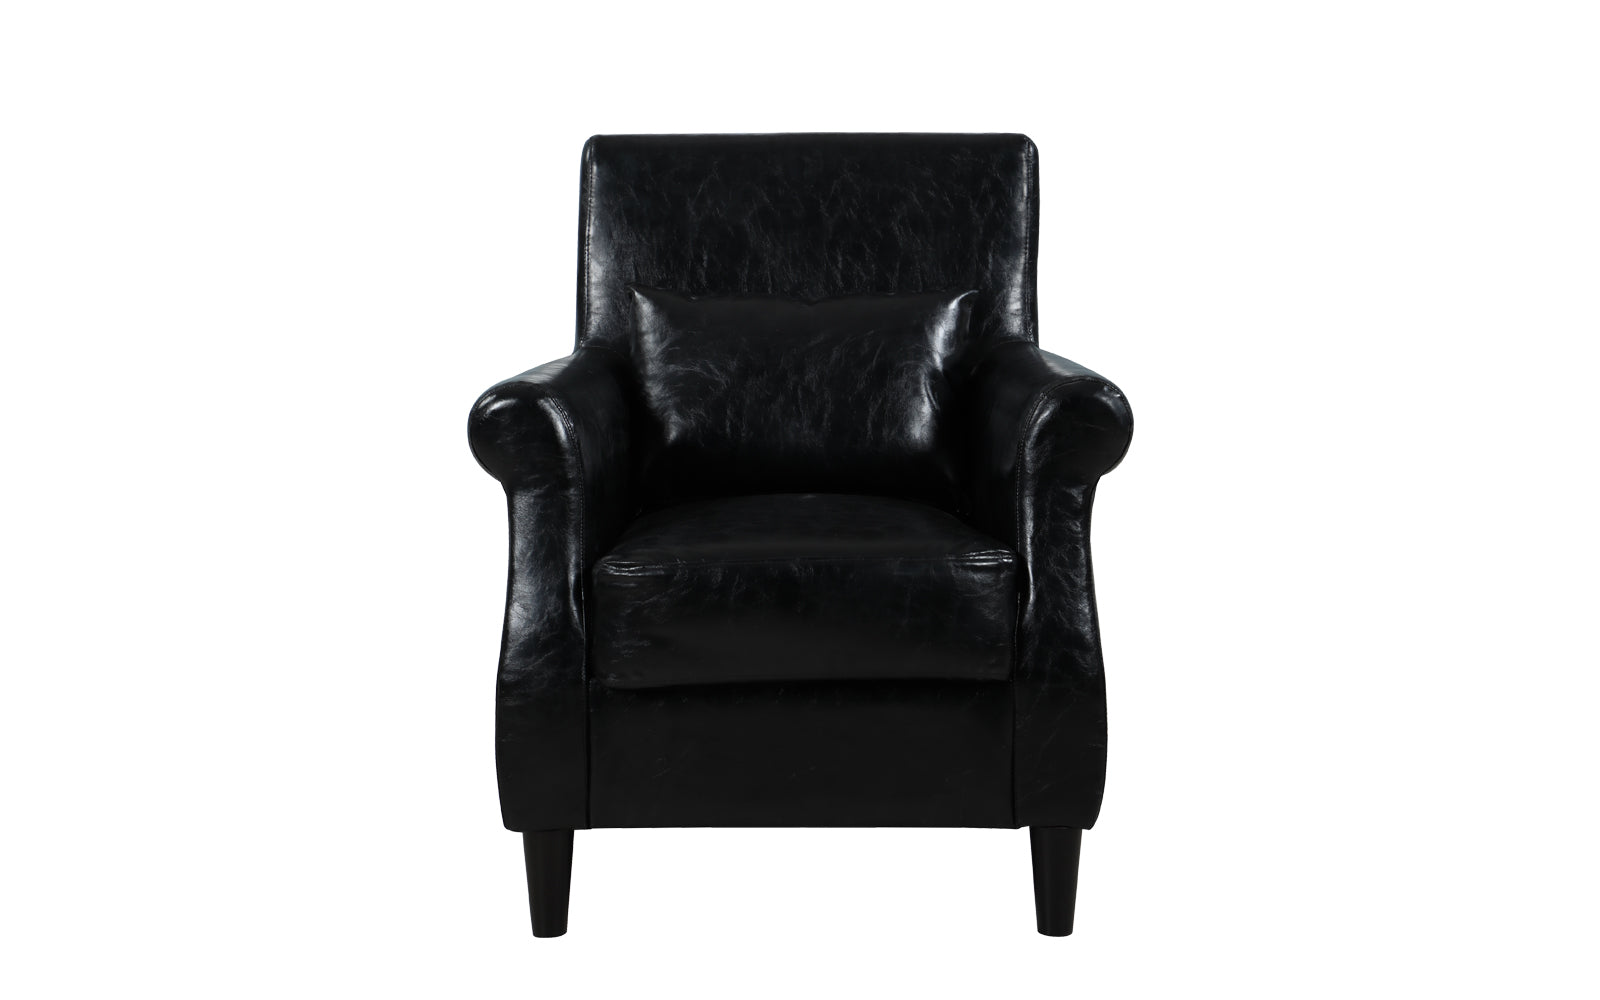 Burgos Classic Victorian-Inspired Scroll Arm Faux Leather Armchair